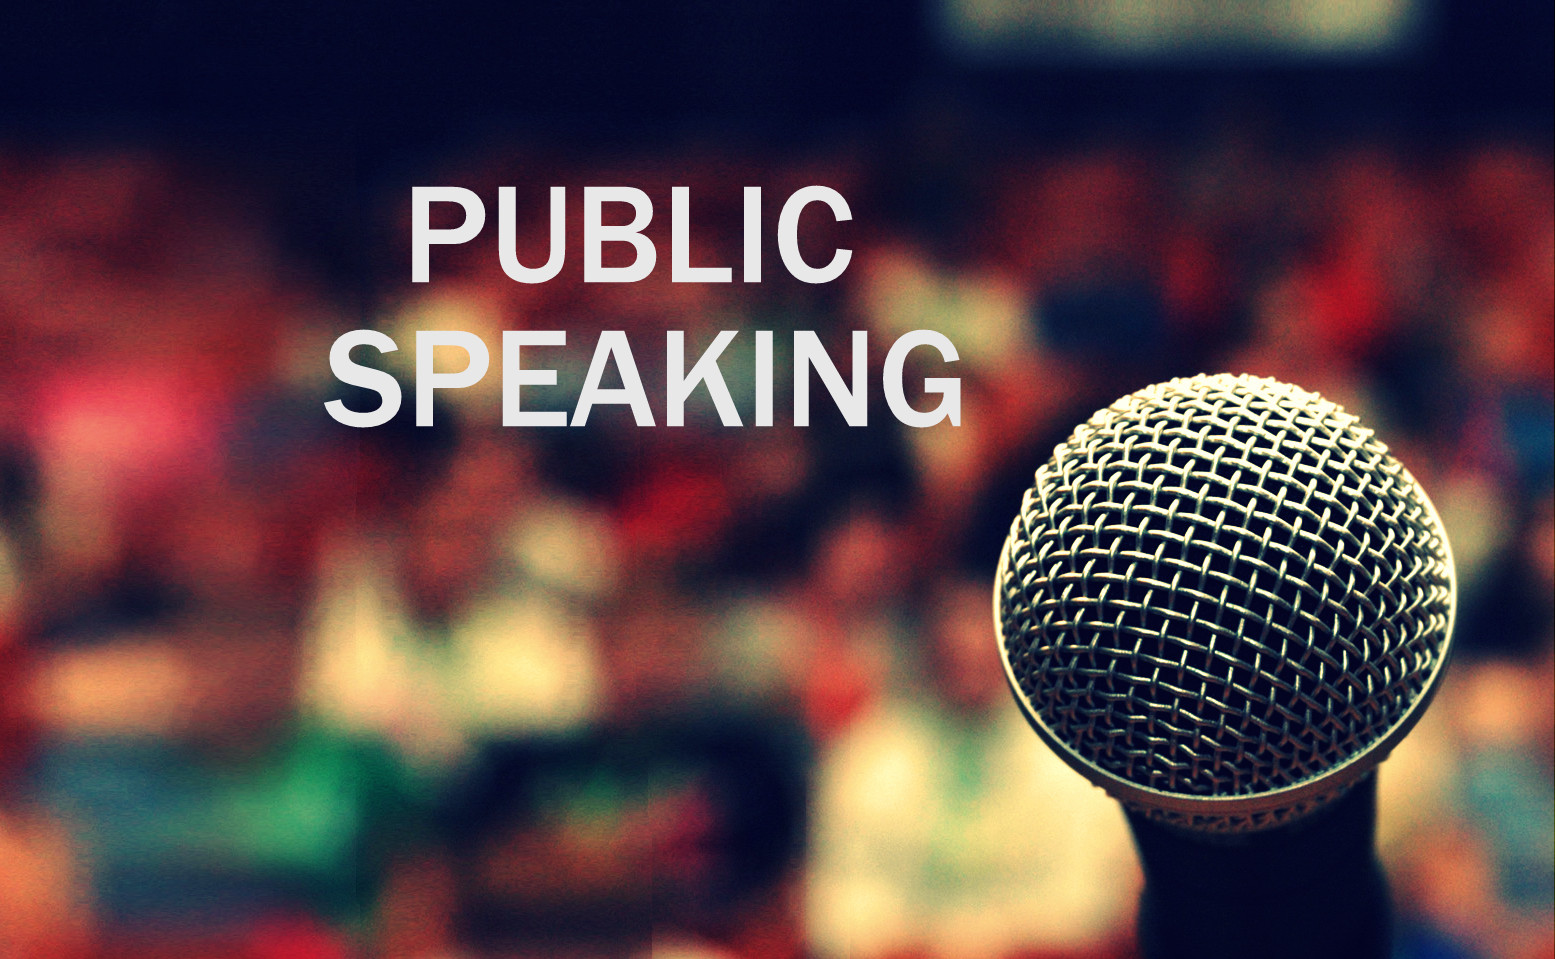 one who makes a public speech